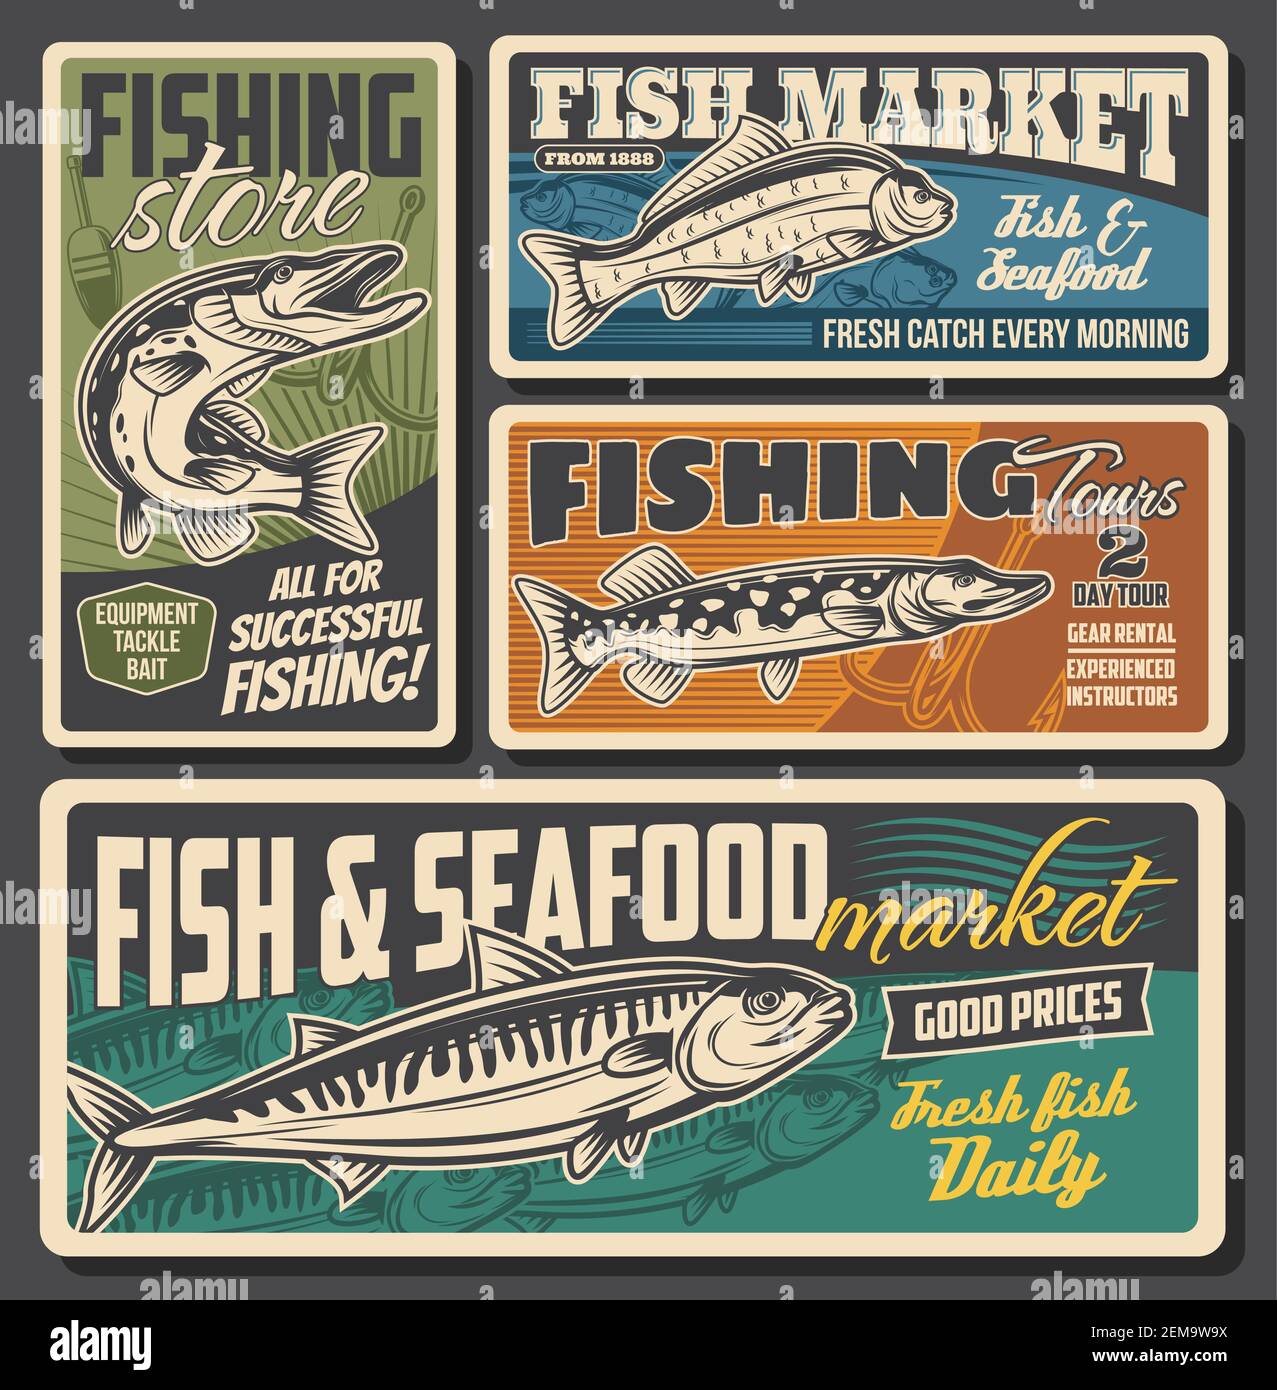 Fish and seafood market, fishing equipment and lures store. Fisher